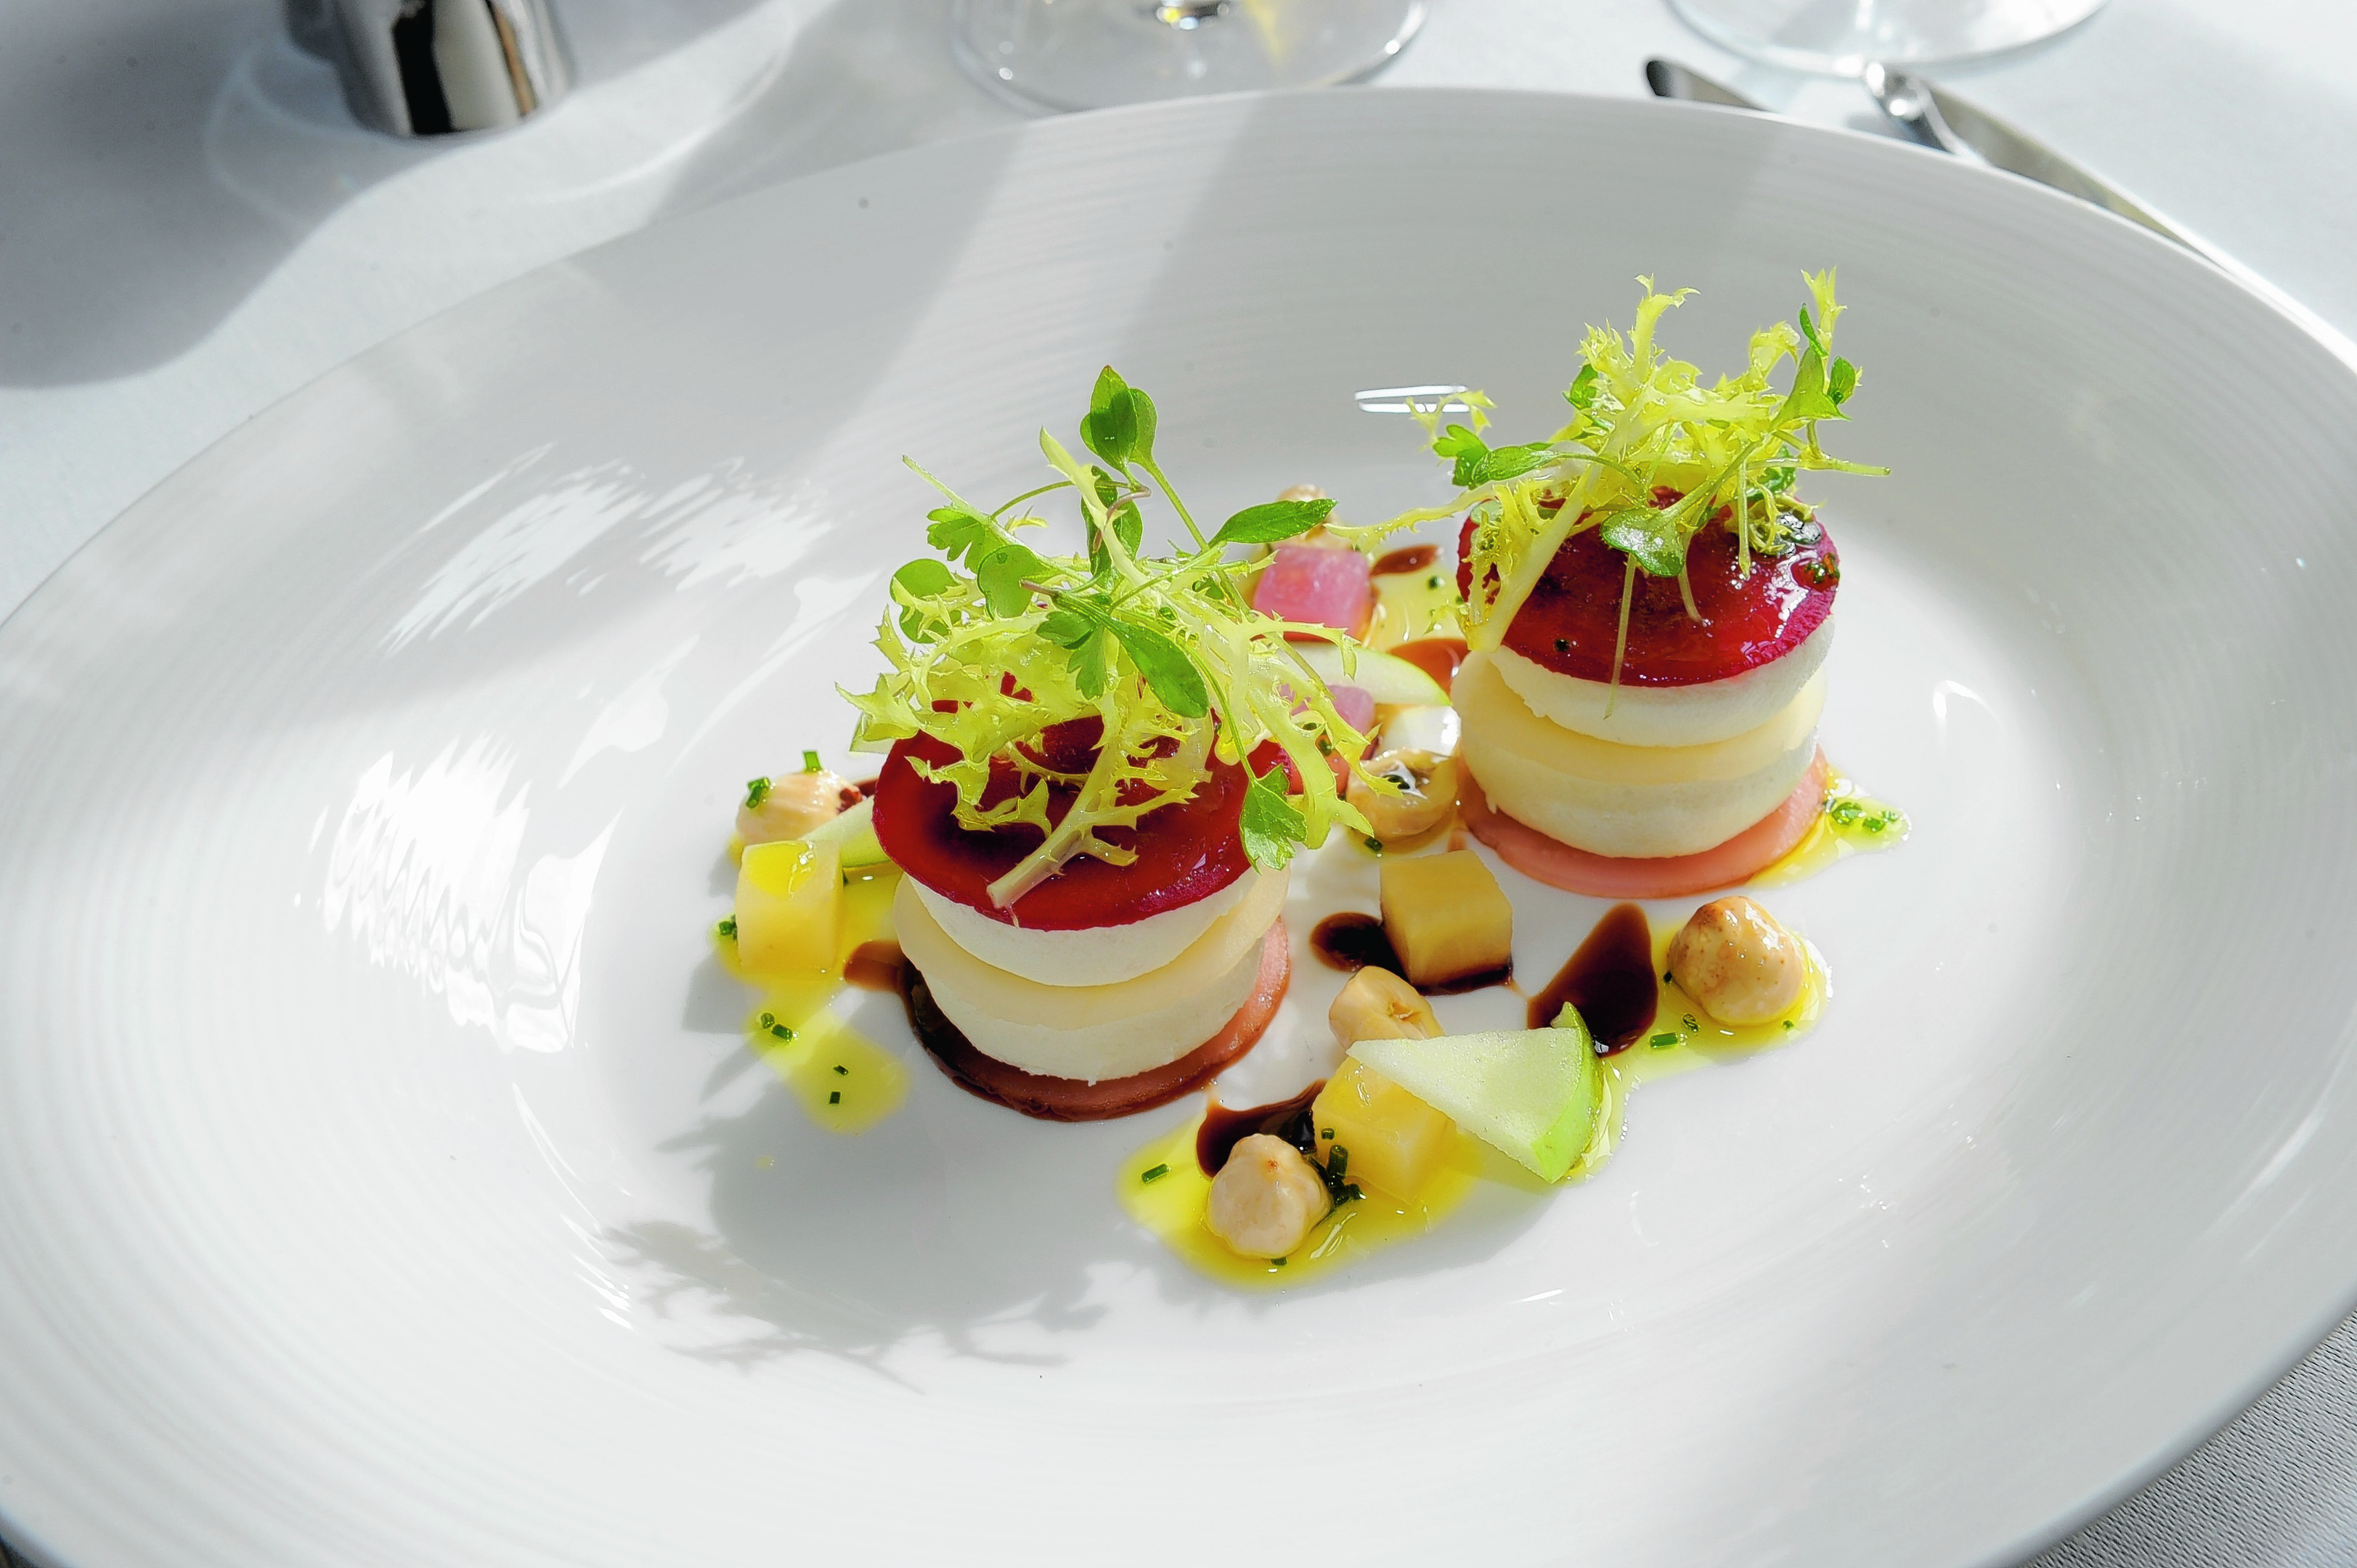 Top food from the Macleod House restaurant